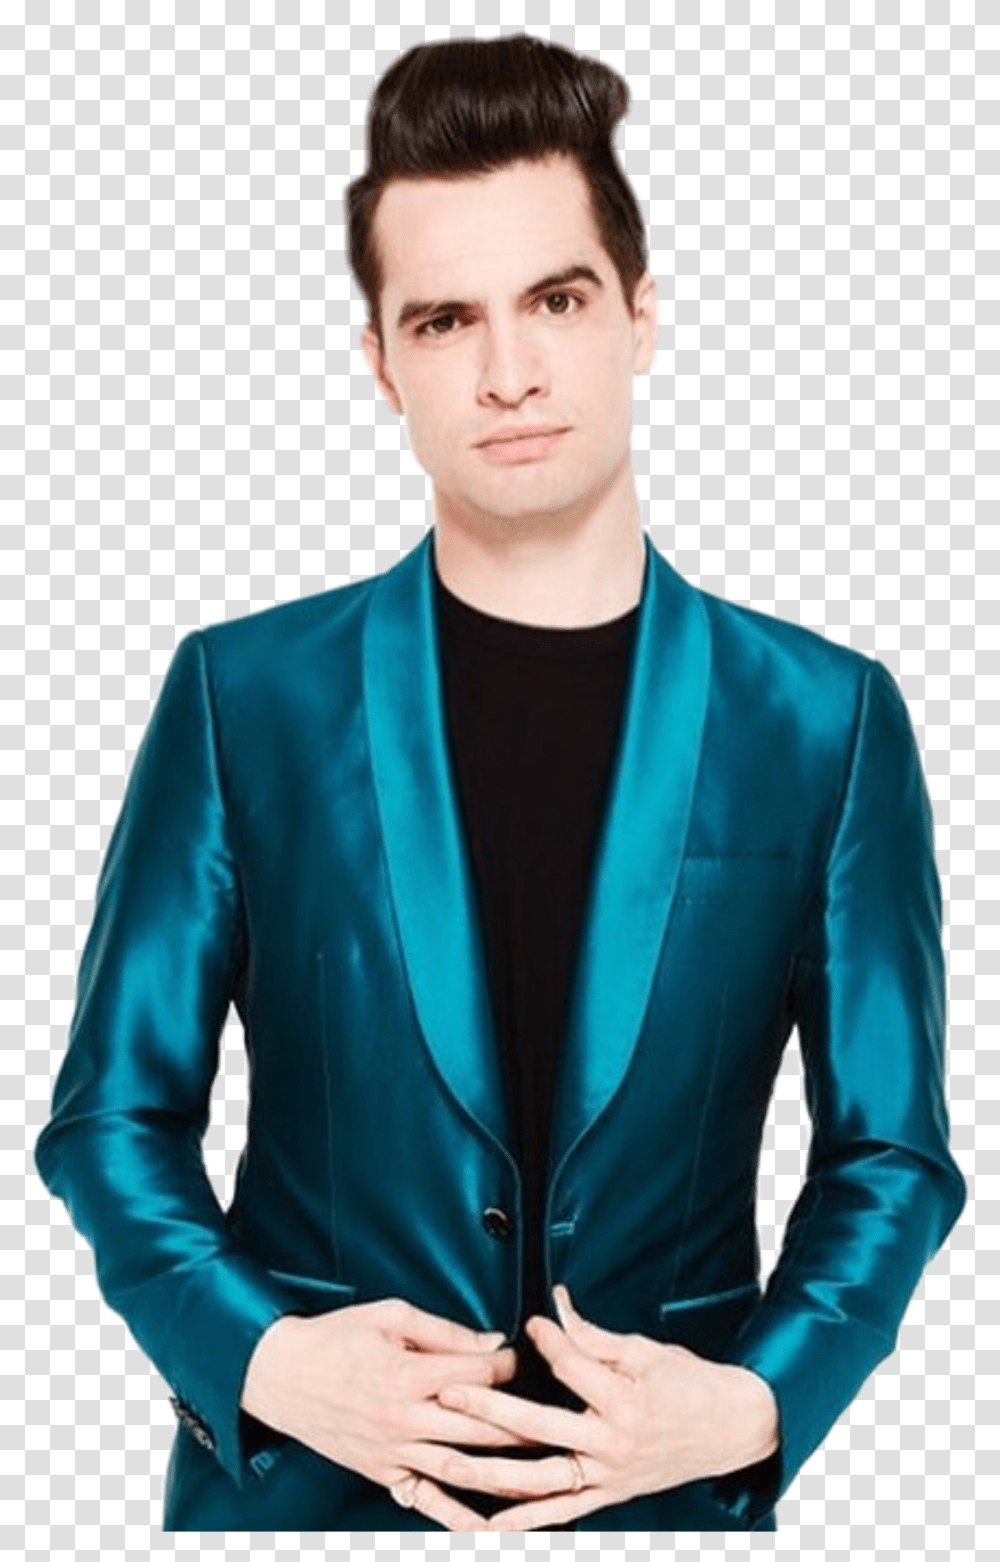 Brendon Urie I Know Not The Best Like Others But Its Brendon Urie Signed Poster Transparent Png